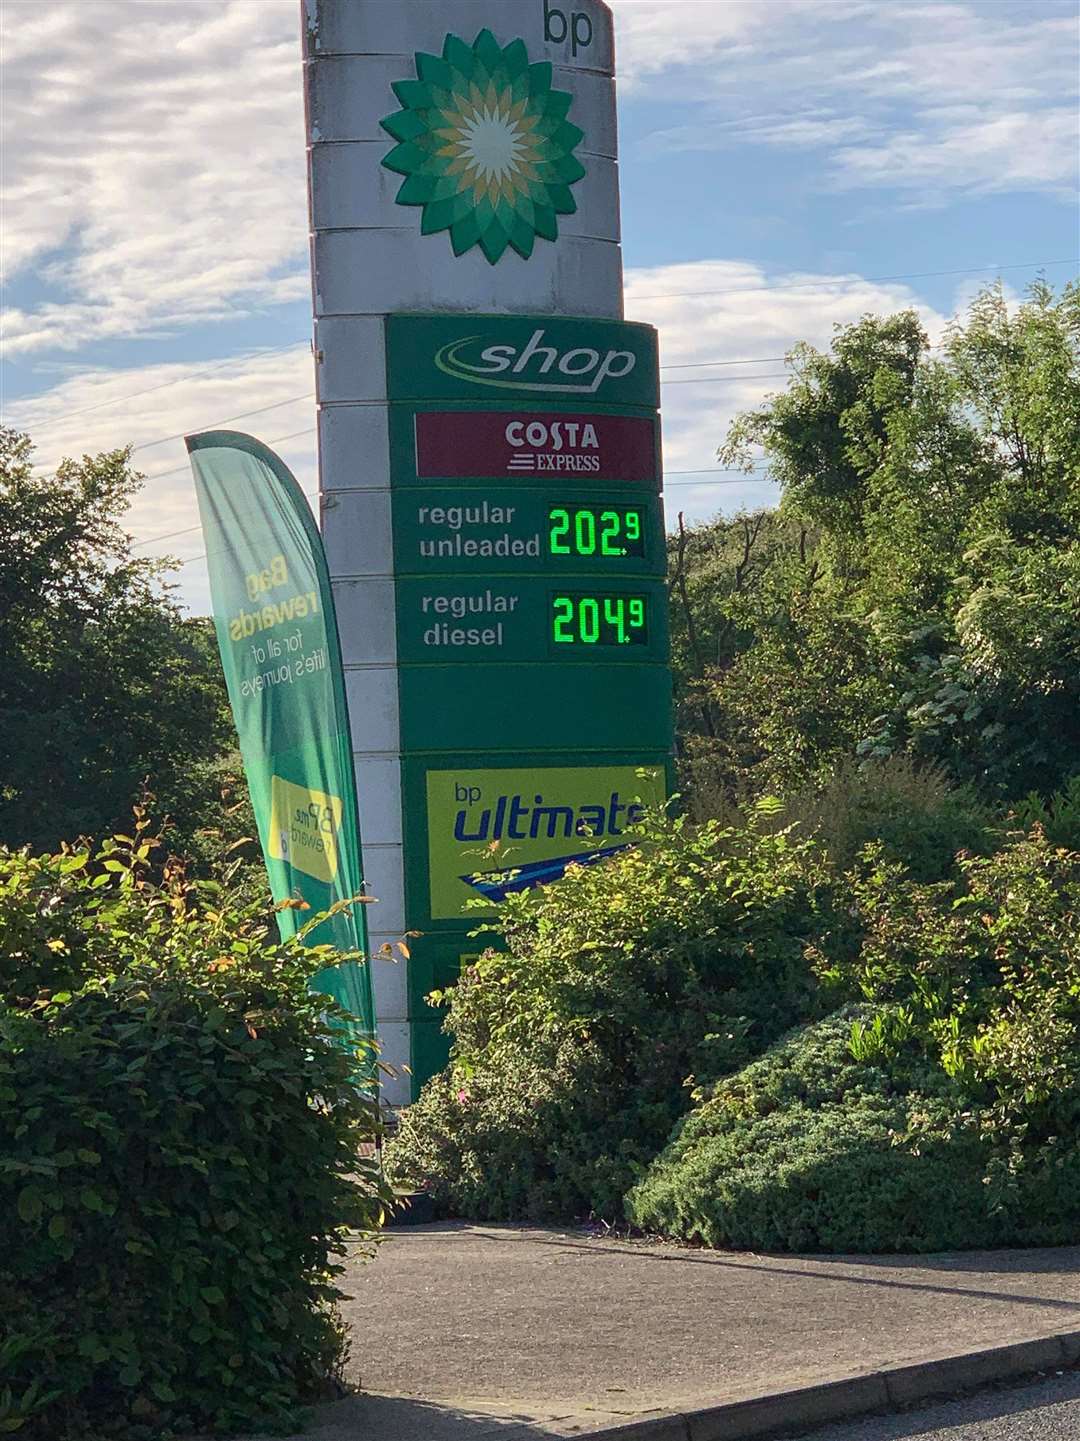 Medway services prices have passed £2. Credit: Rhys Nolan (57183384)